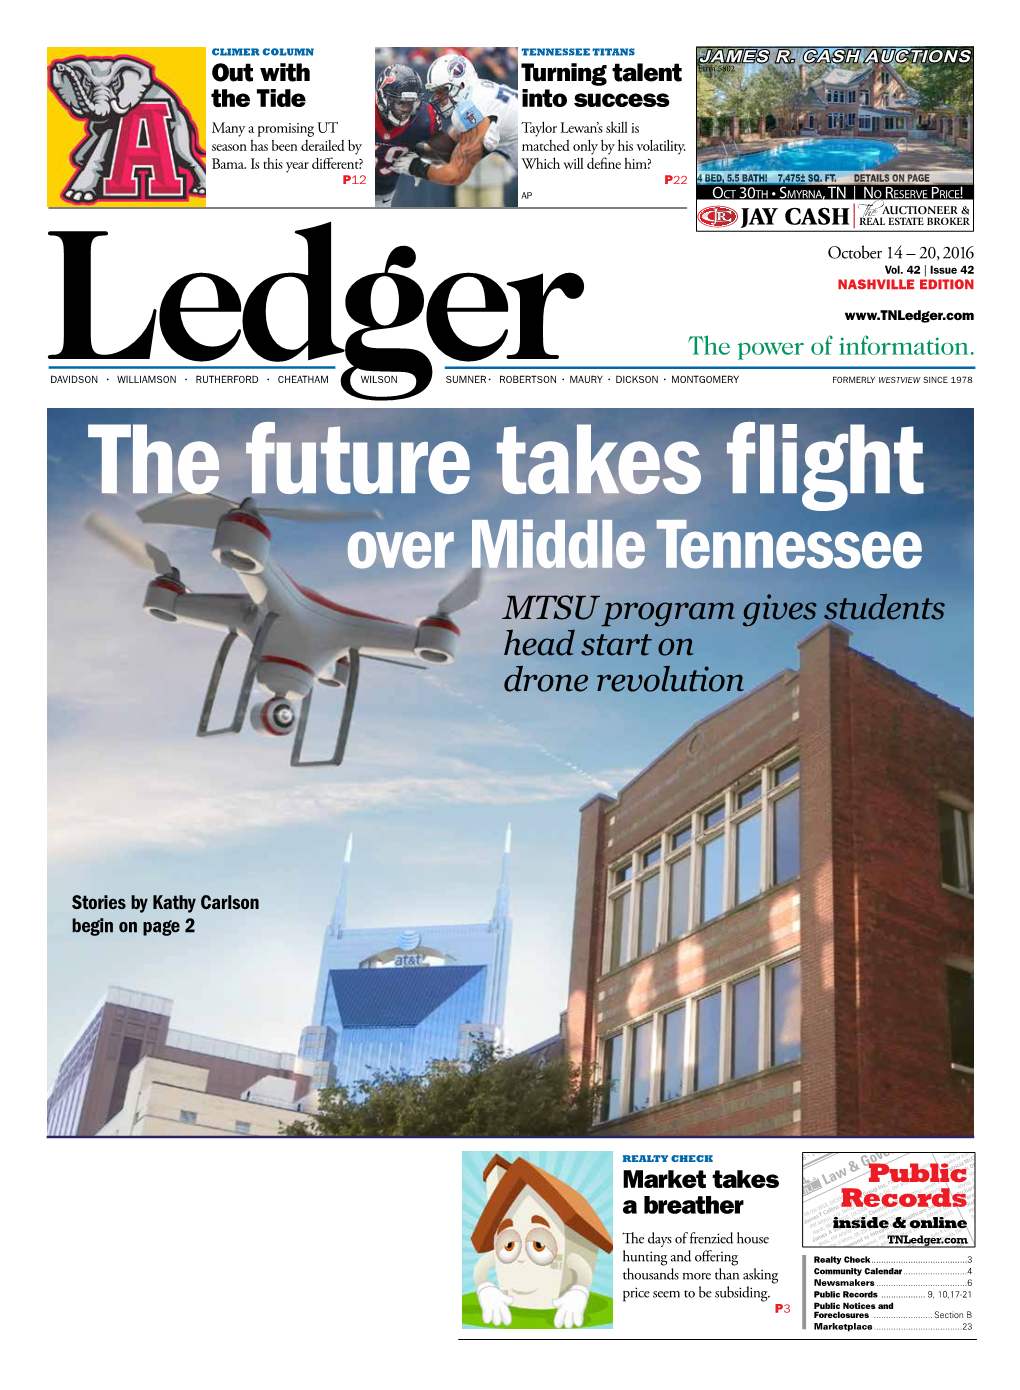 Over Middle Tennessee MTSU Program Gives Students Head Start on Drone Revolution